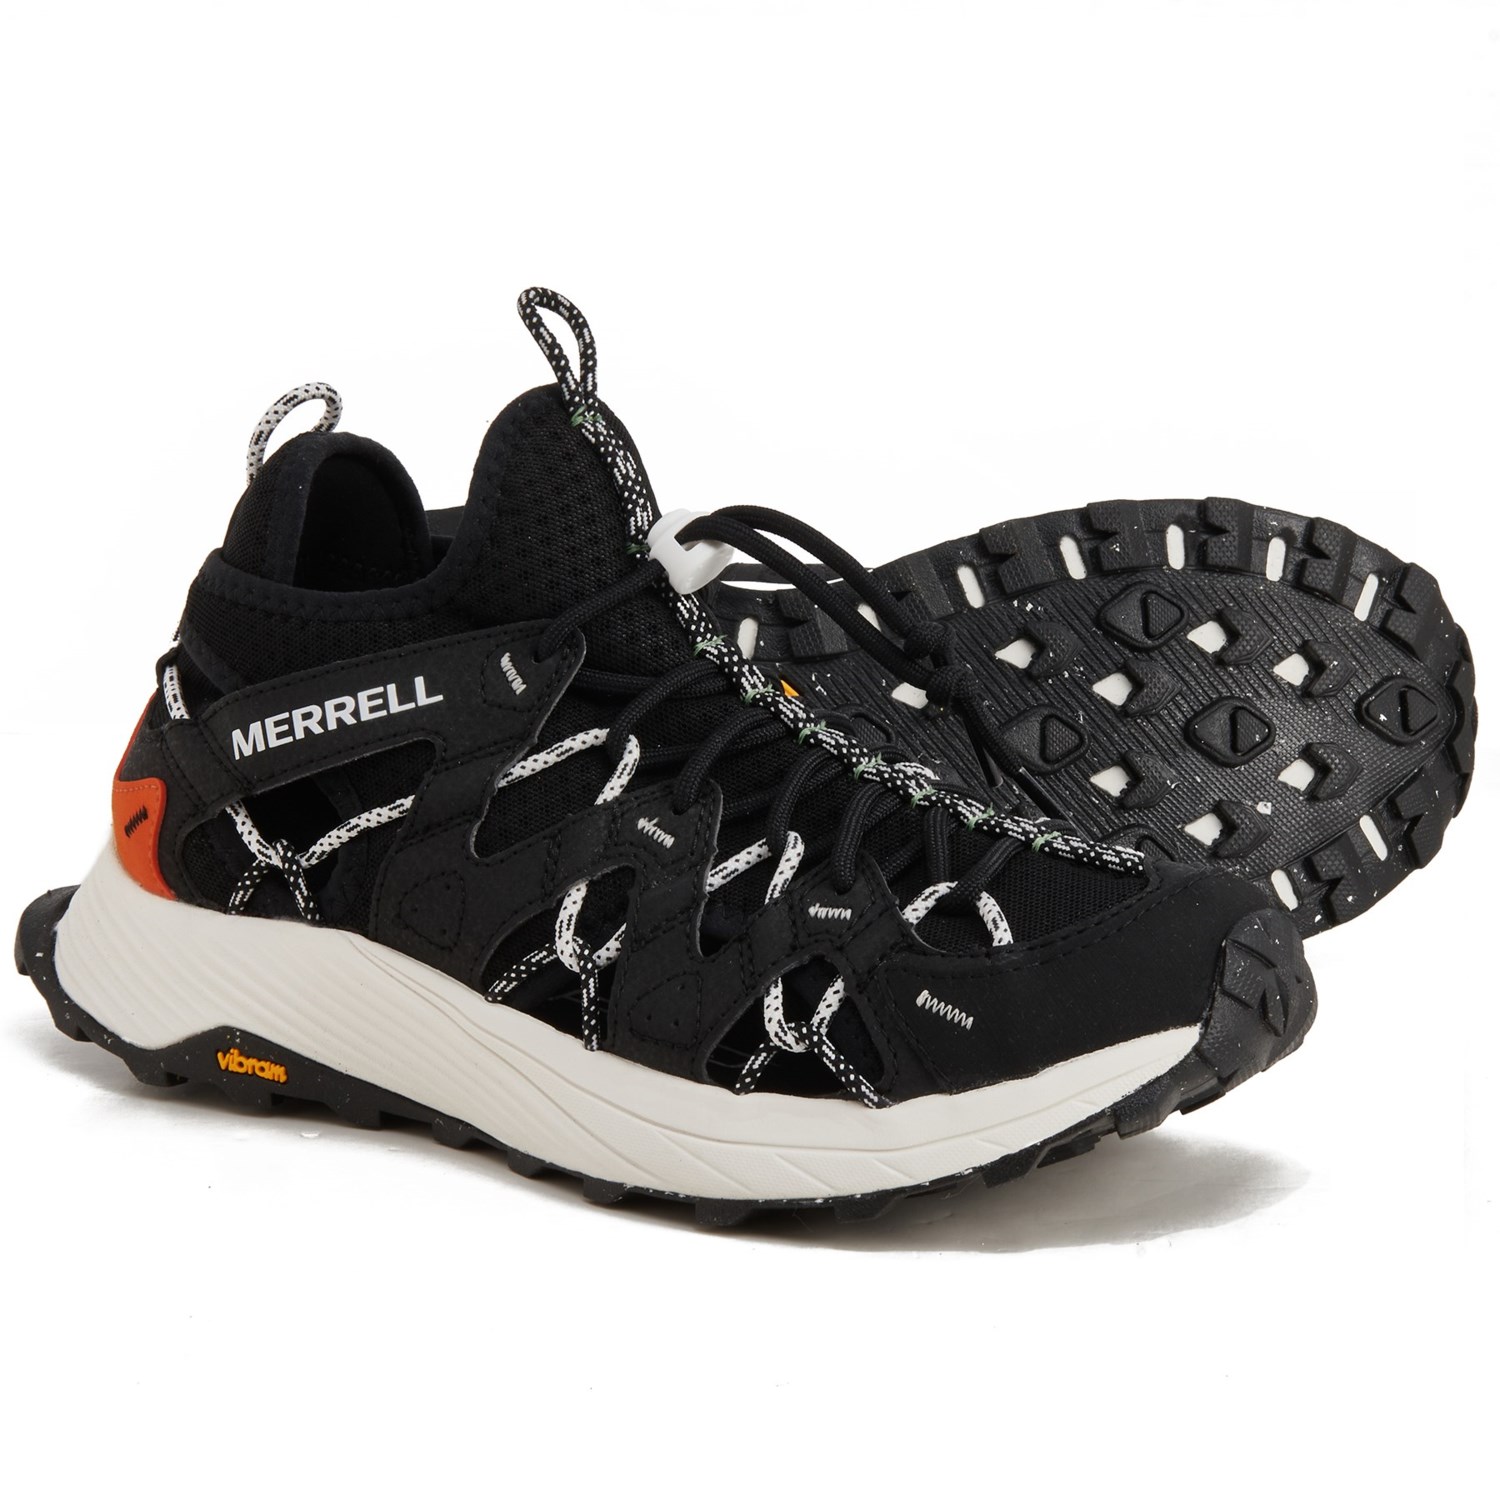 Merrell Moab Flight Sieve Water Shoes (For Men) - Save 64%